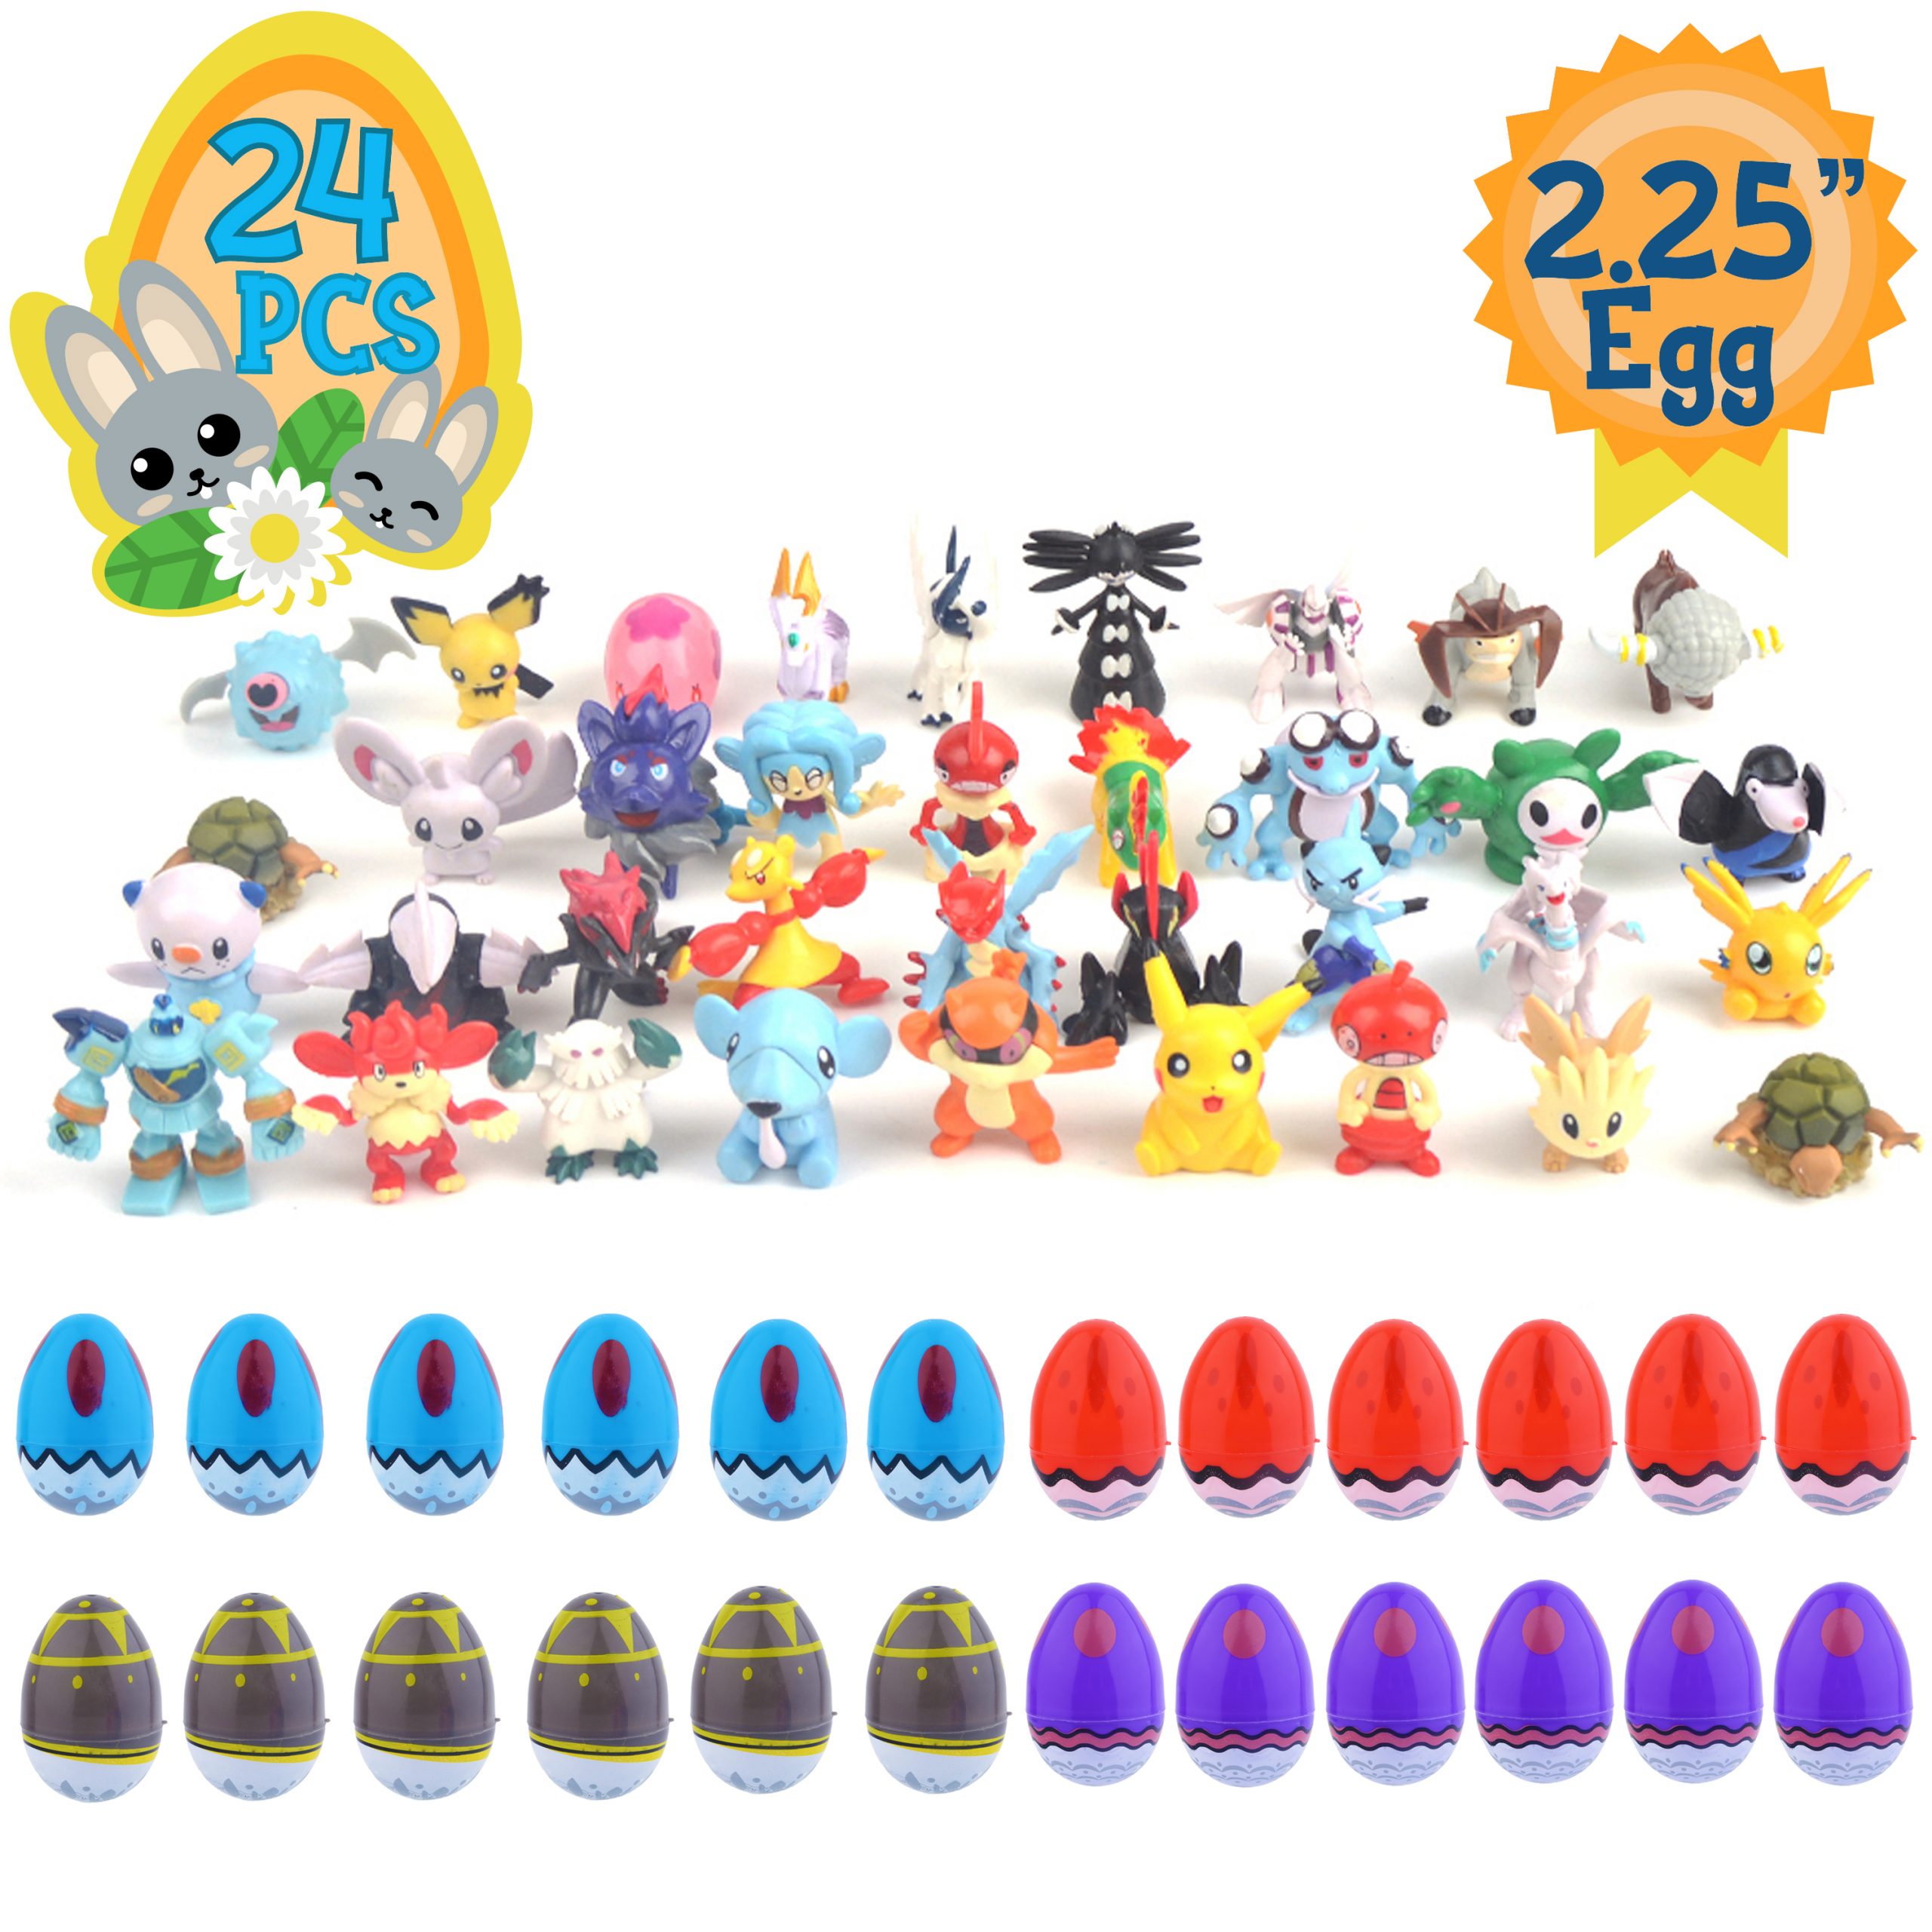 24 Toy Filled 2.25"  Plastic Easter Eggs with Assorted Figurine Pokemon ...